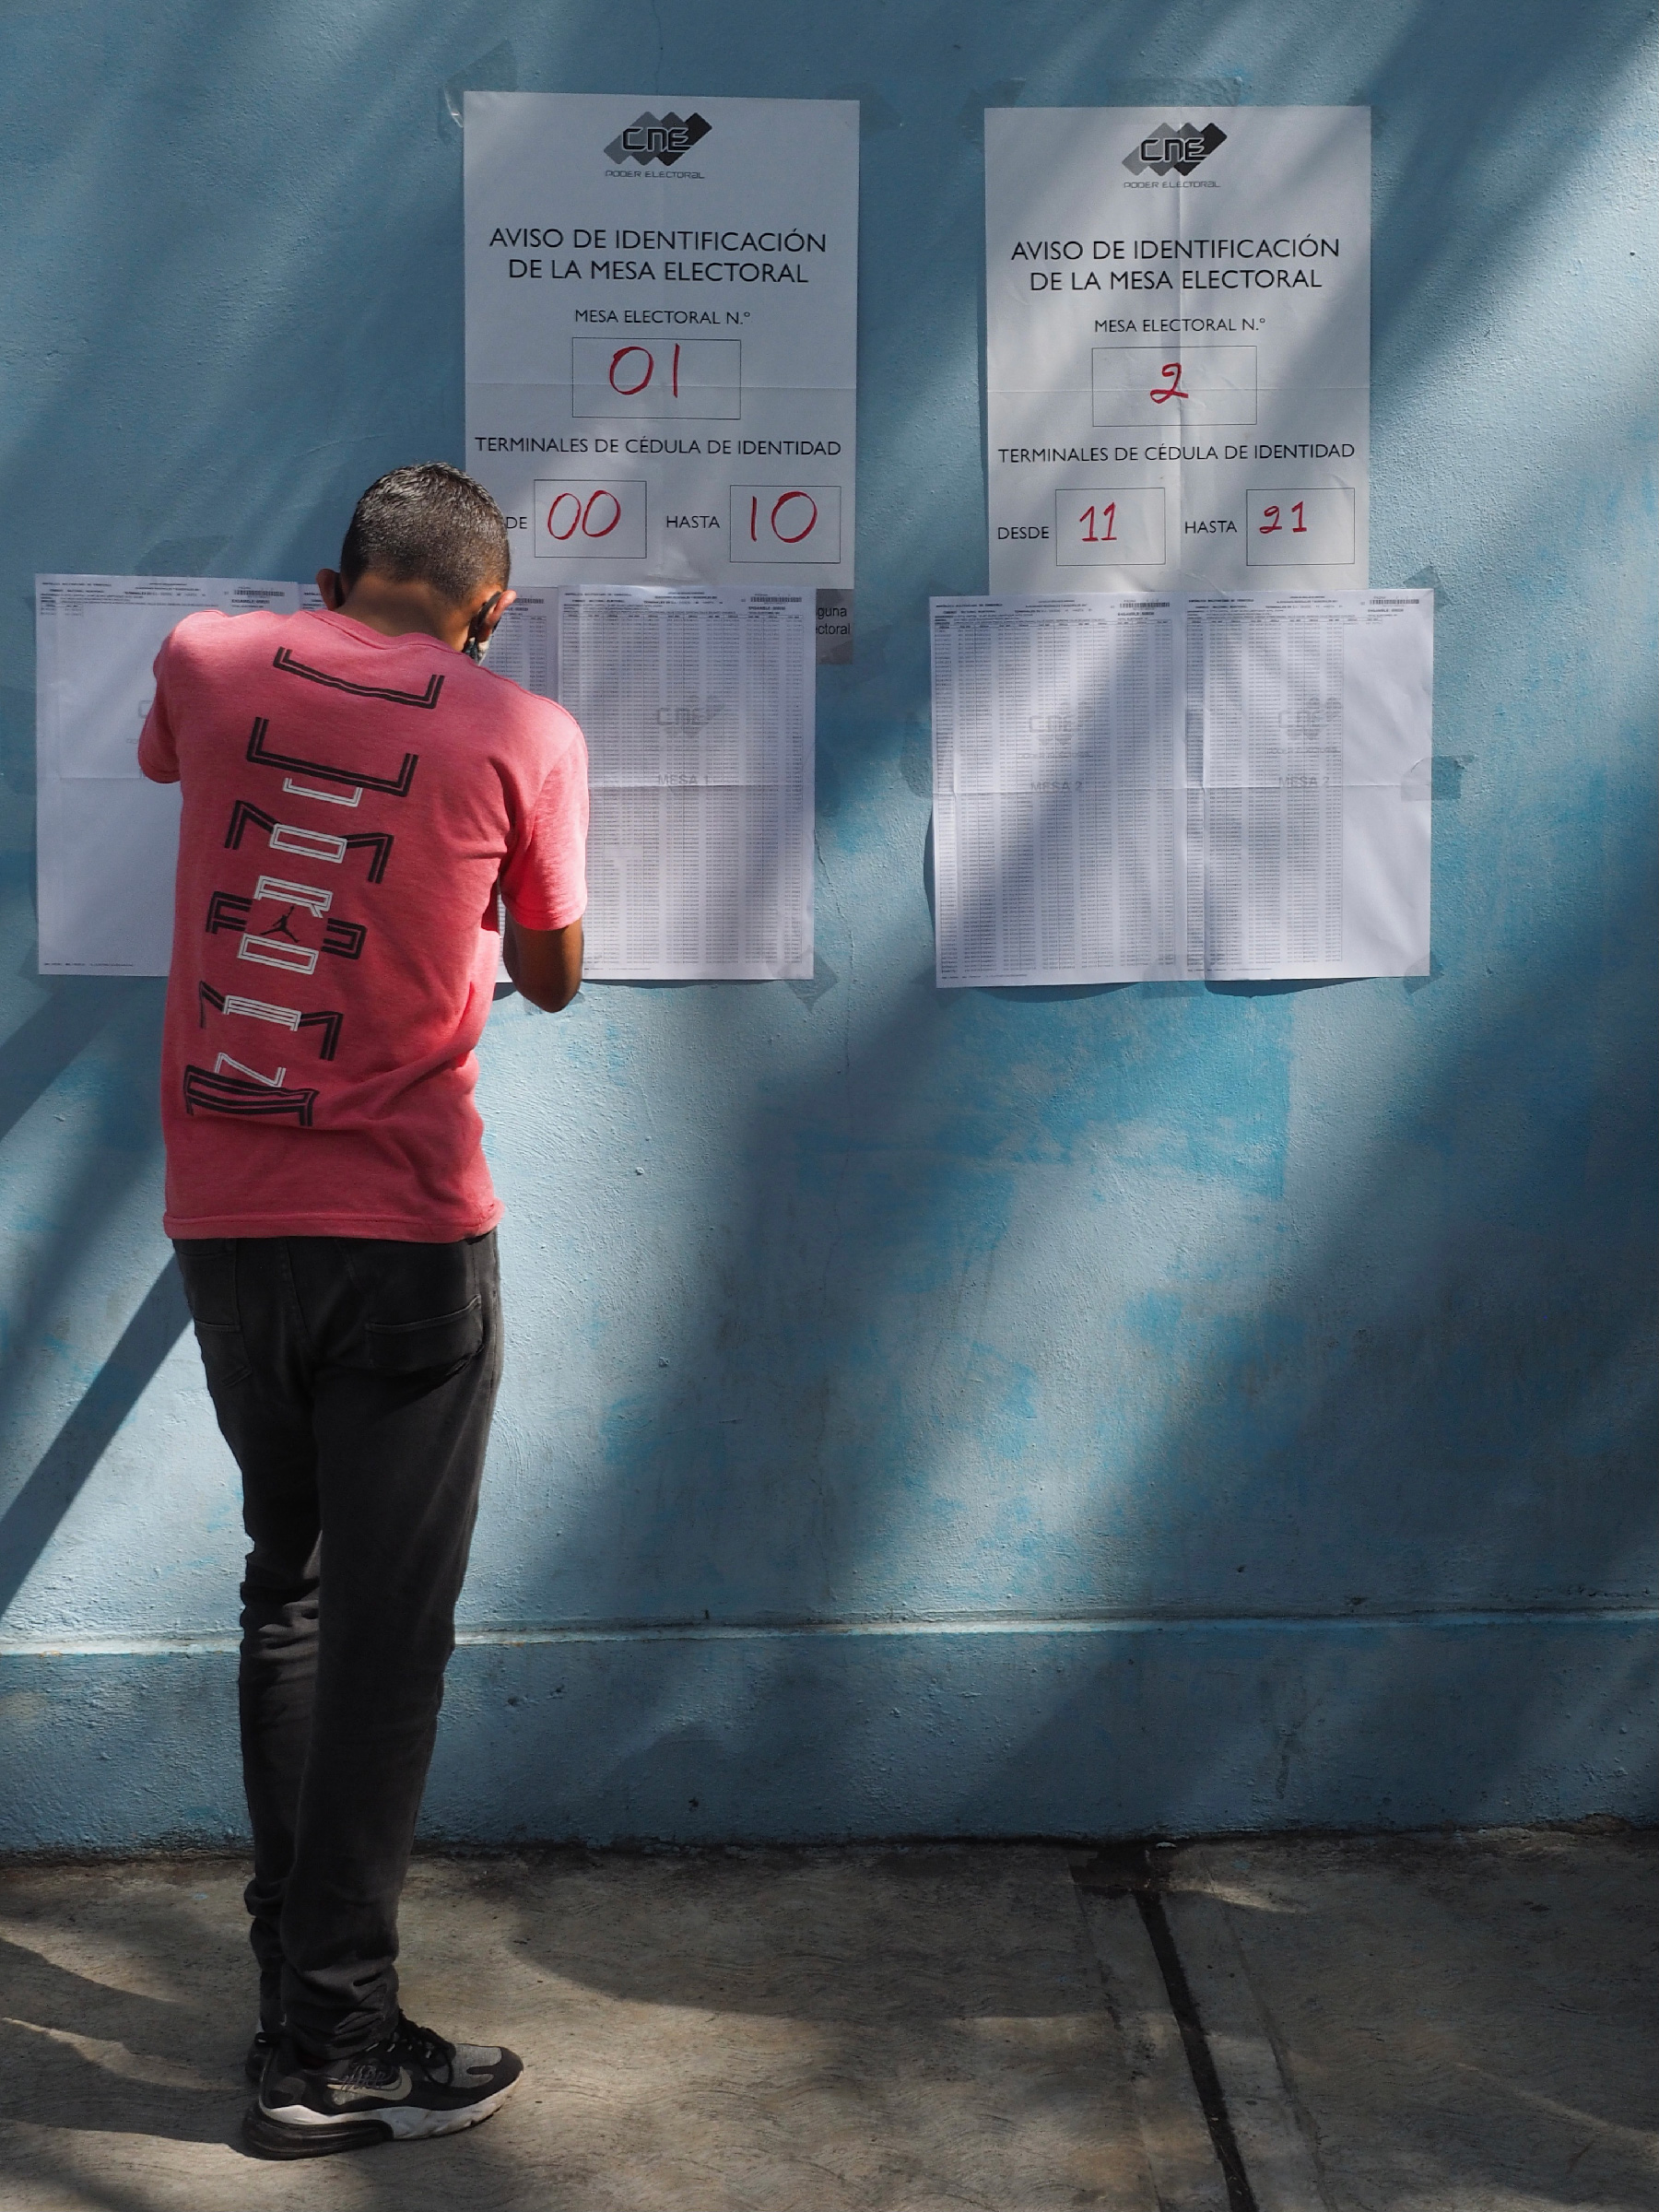 A Venezuelan voter searches for his name on the voter list at the Liceo Pedro Emilio Coll in the Coche Parish in Caracas, Venezuela during elections on November 21, 2021.